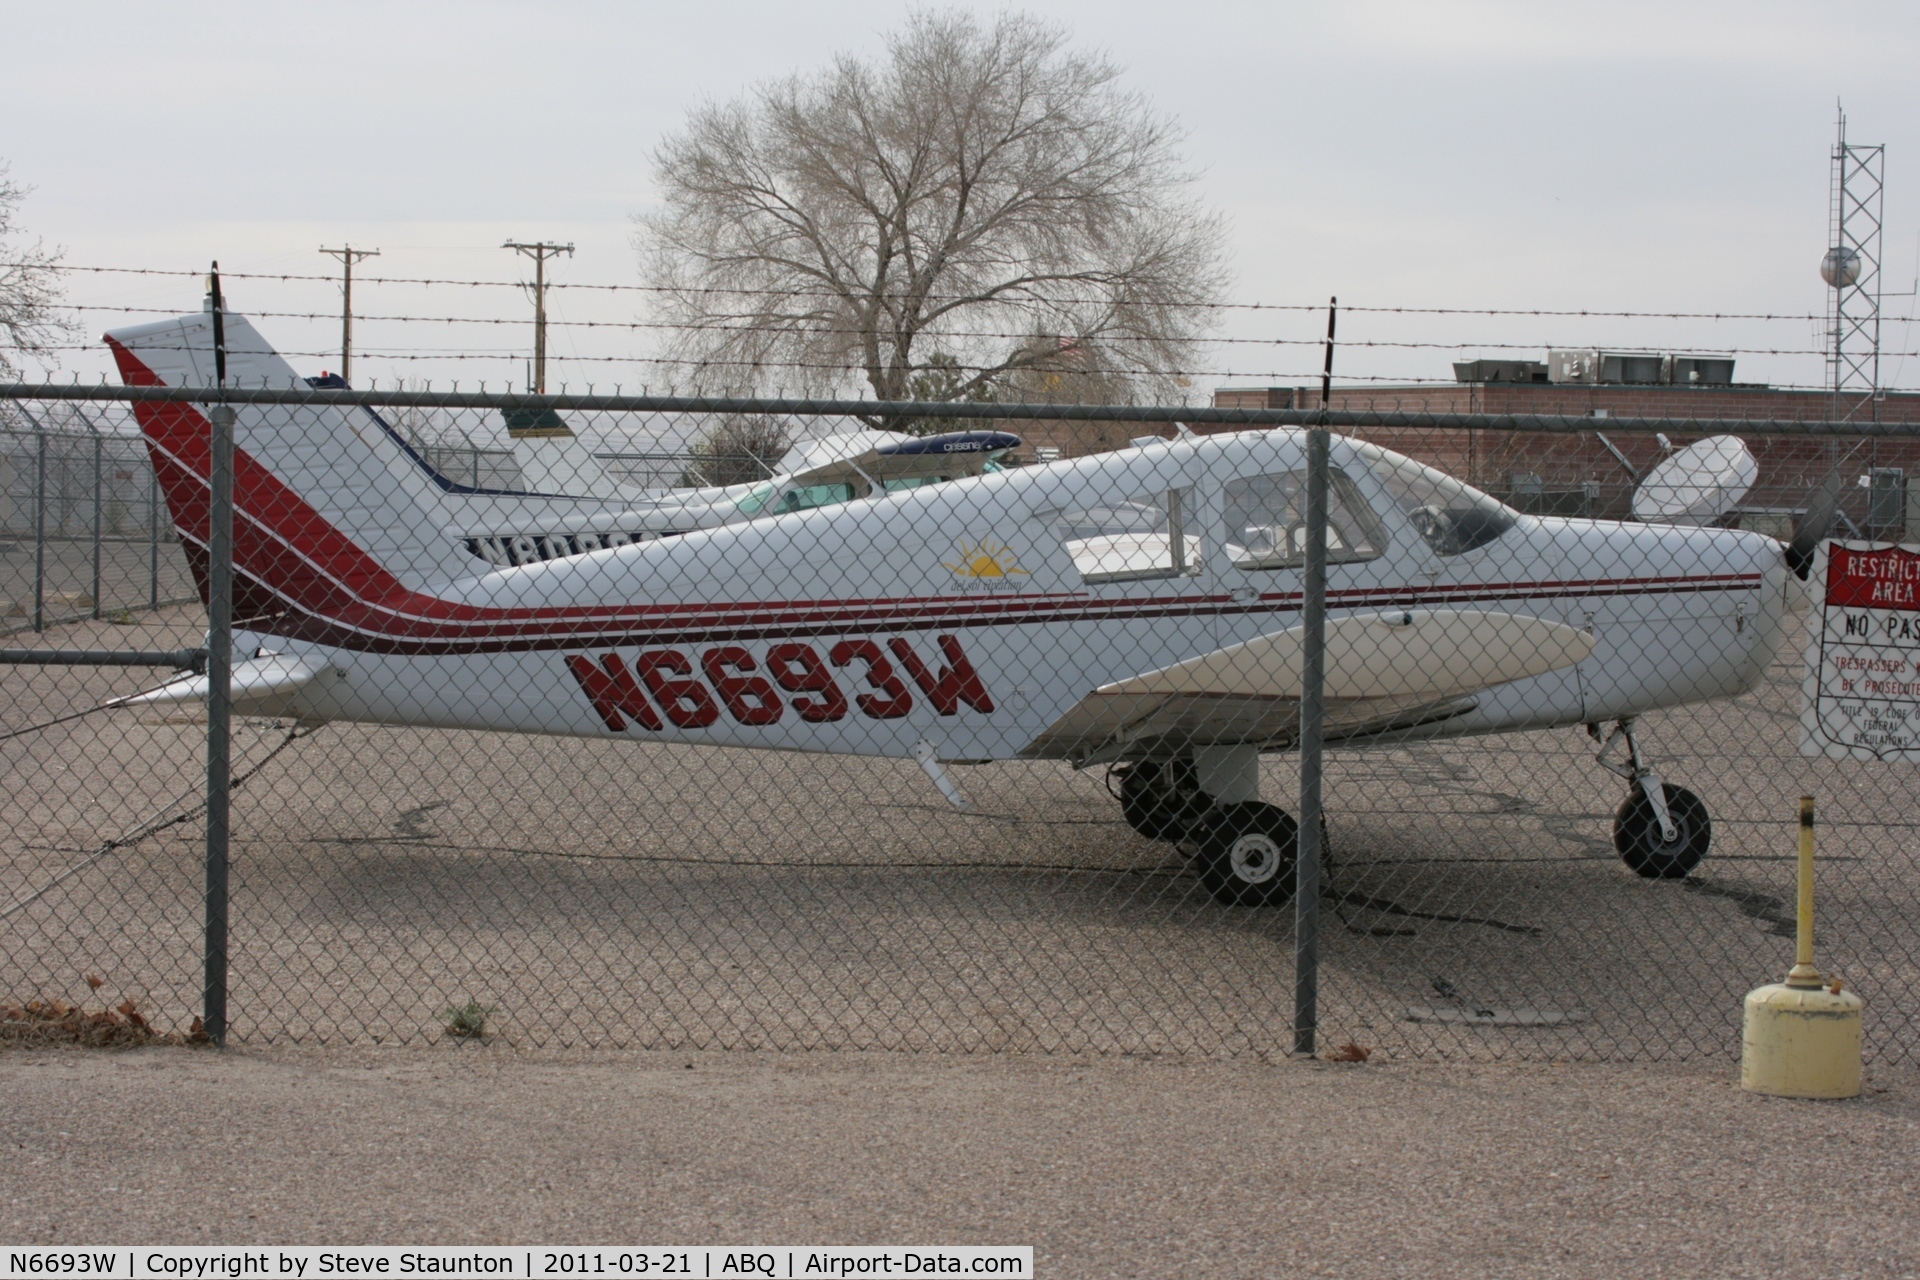 N6693W, 1965 Piper PA-28-140 Cherokee C/N 28-21284, Taken at Alburquerque International Sunport Airport, New Mexico in March 2011 whilst on an Aeroprint Aviation tour